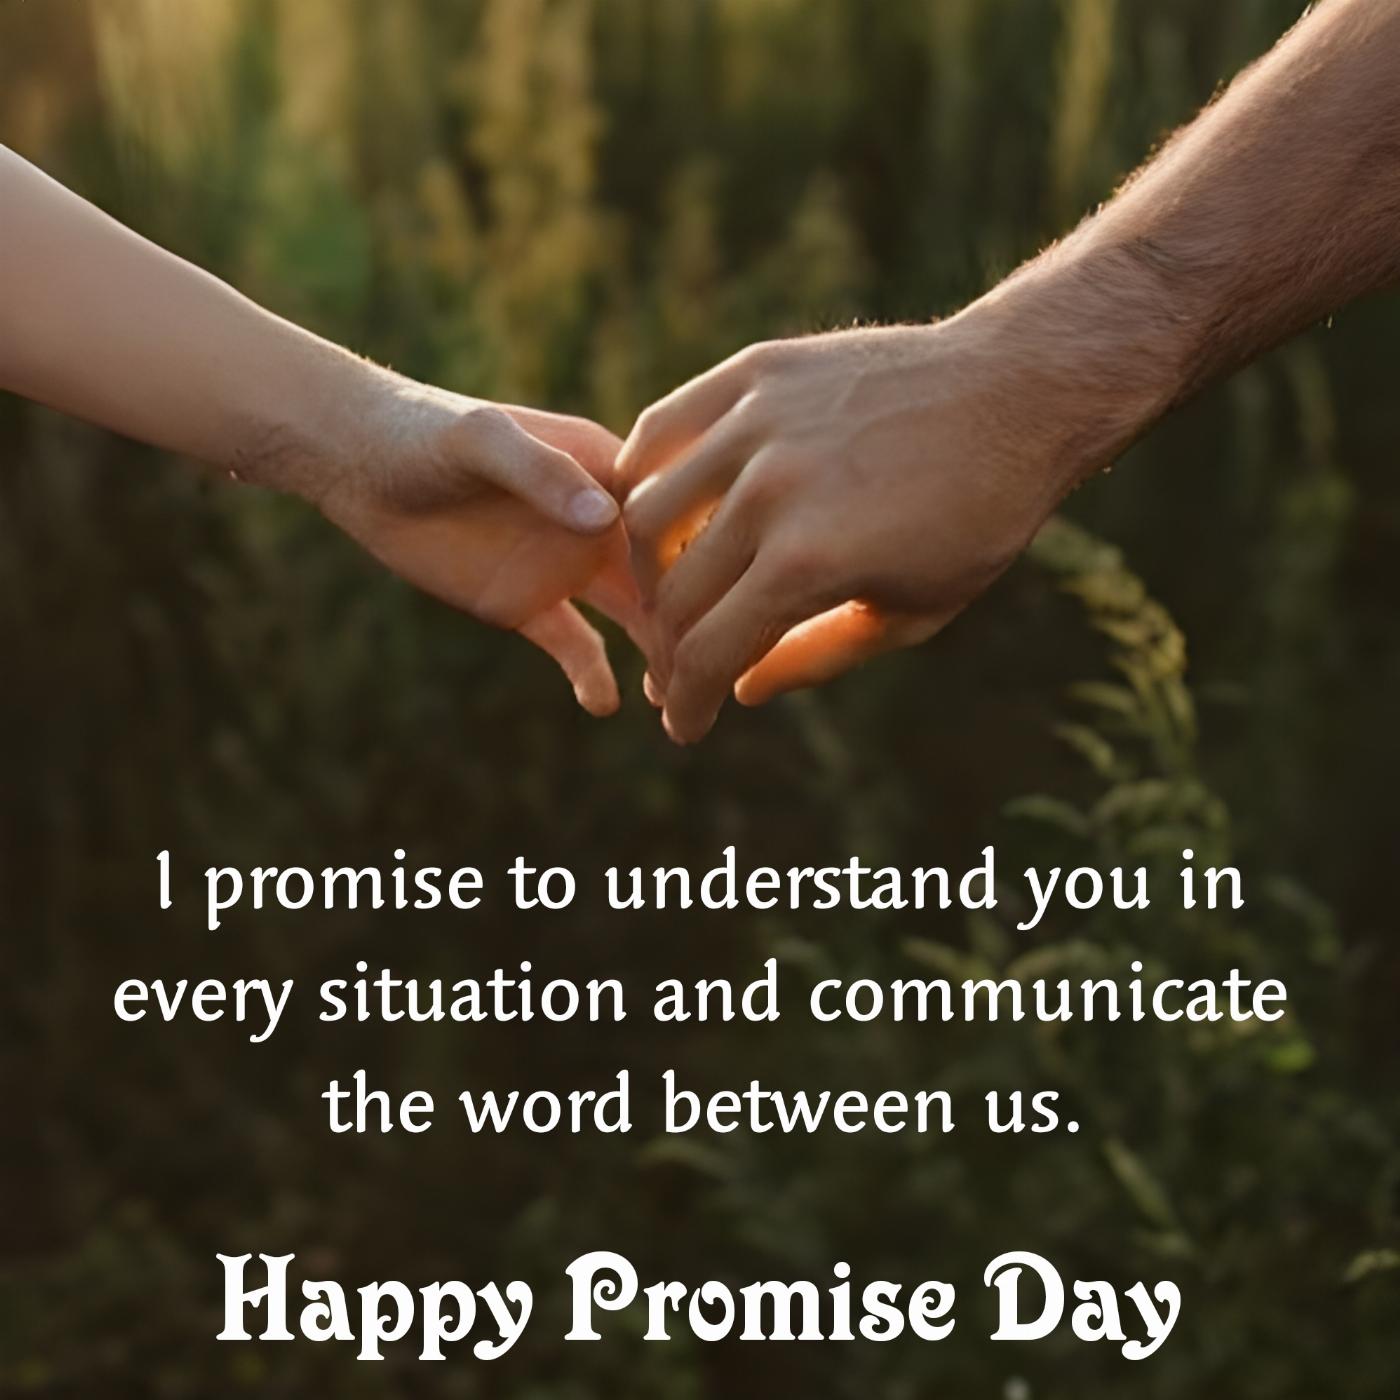 I promise to understand you in every situation and communicate the word between us